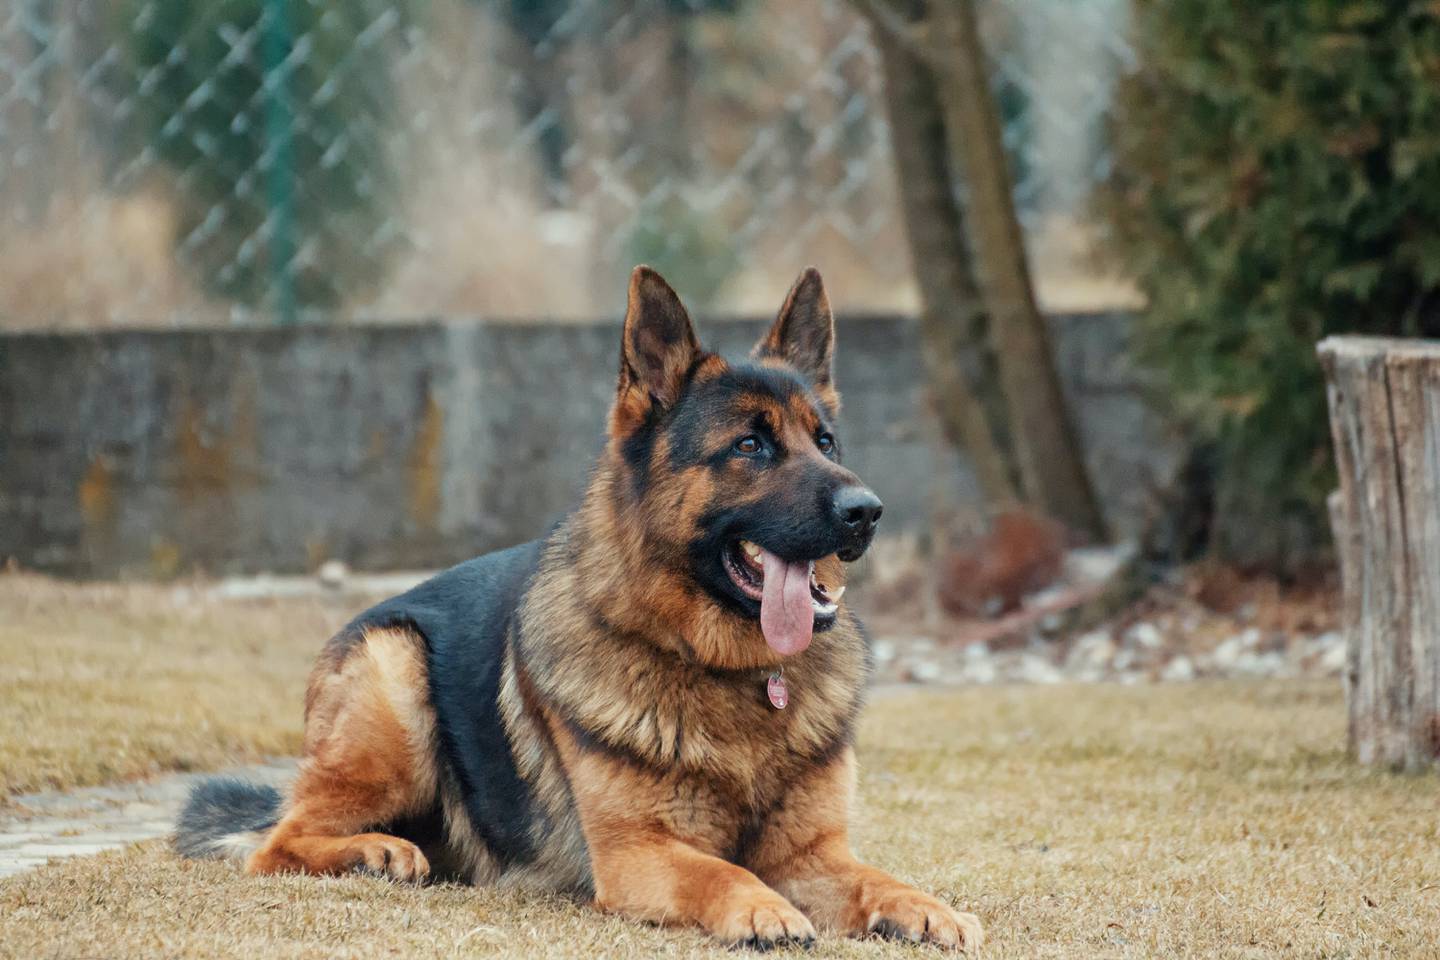 If you have a German Shepherd you will confirm how intelligent they are when receiving commands.